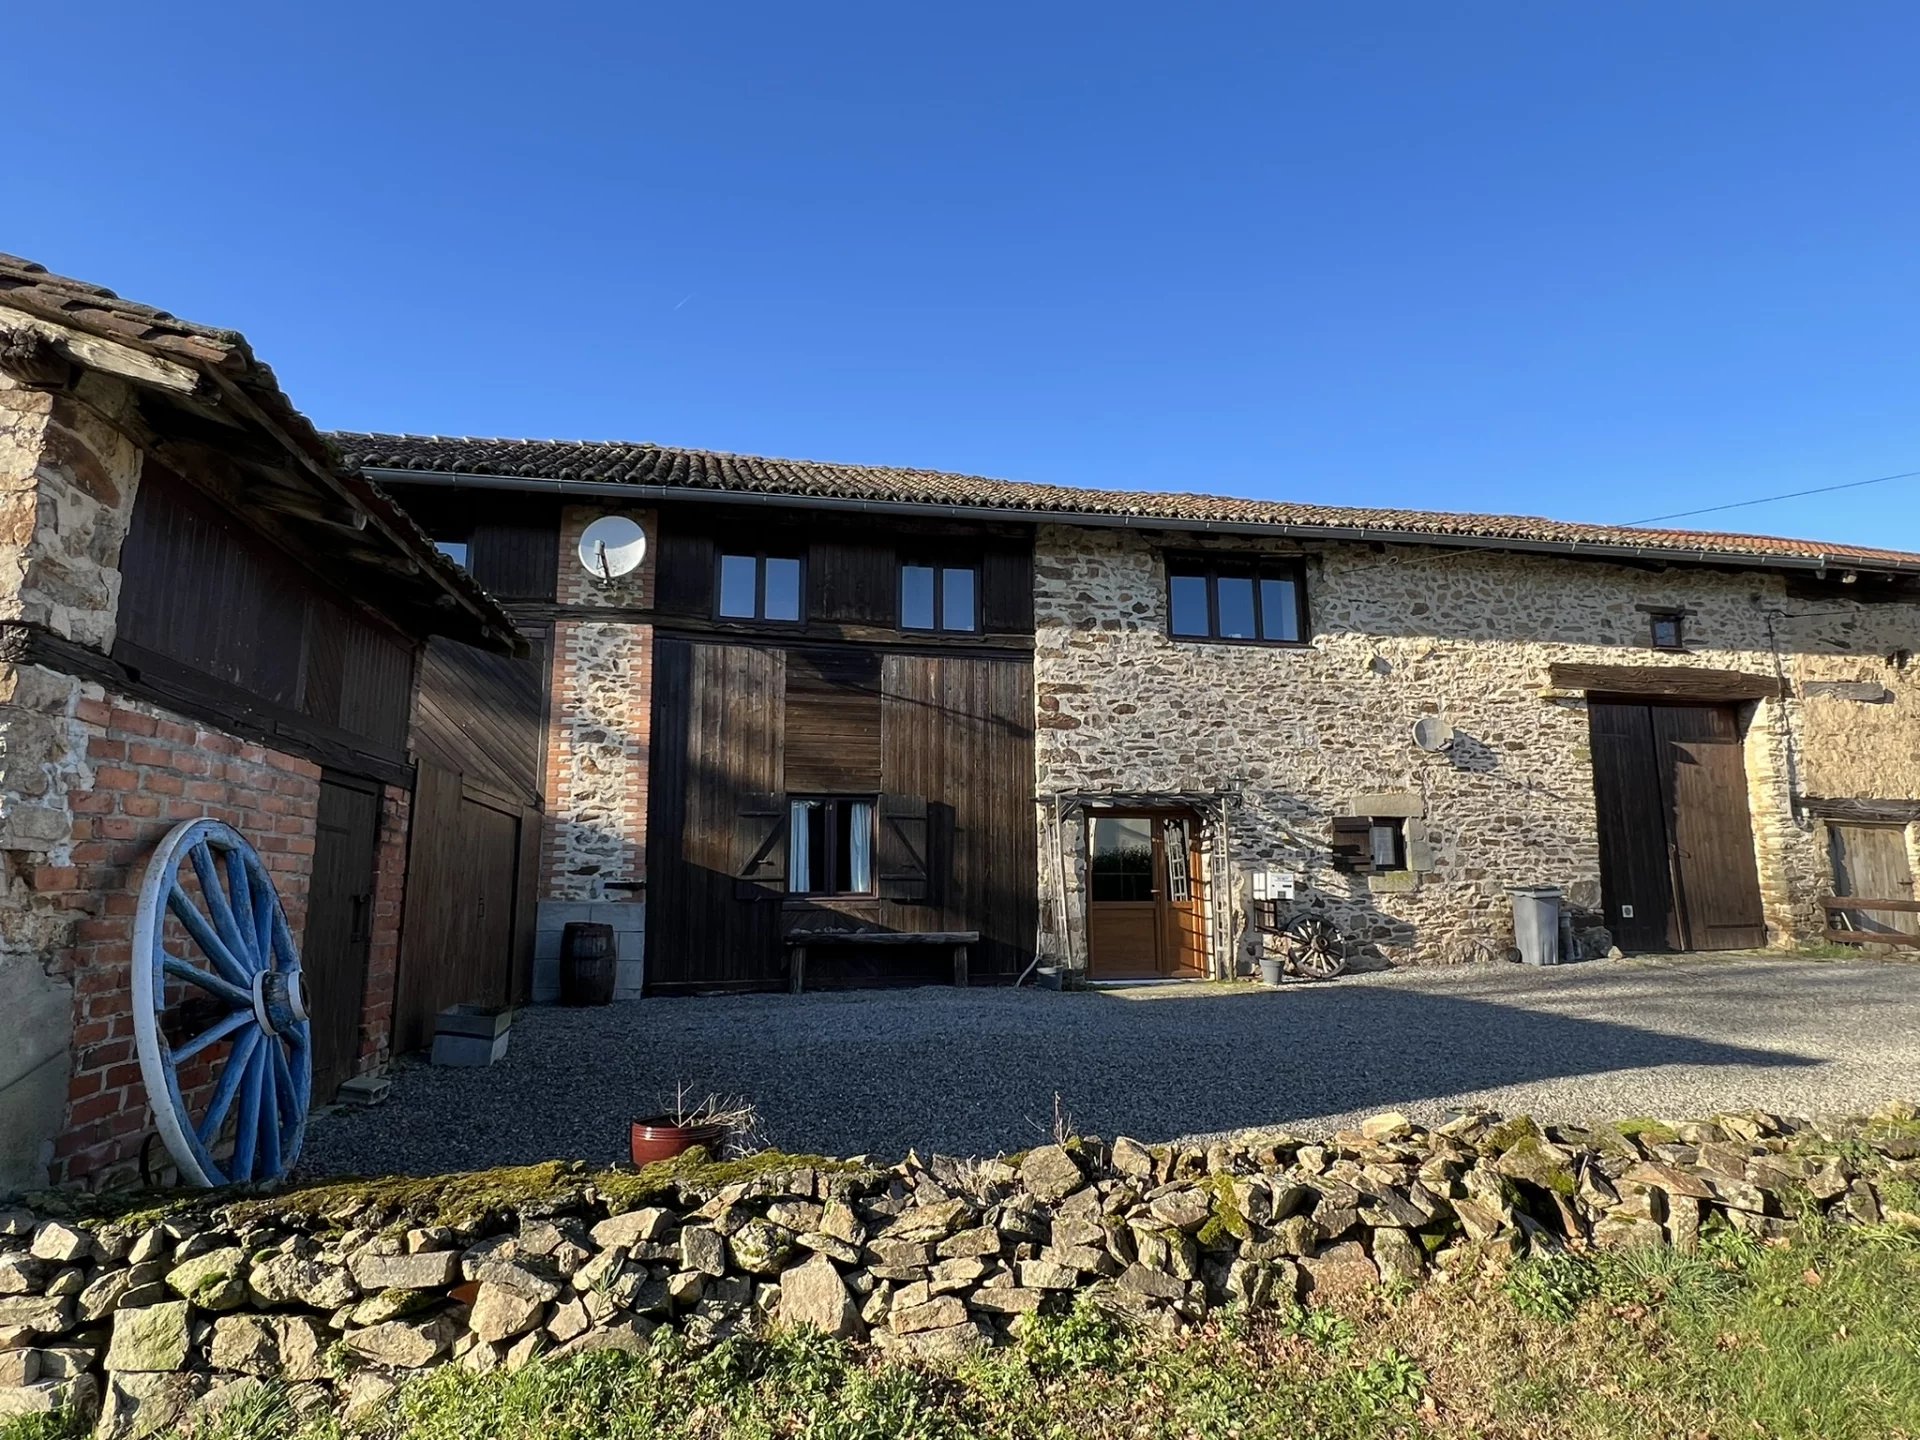 3/4 bed stone barn renovation with great views and upside down layout!